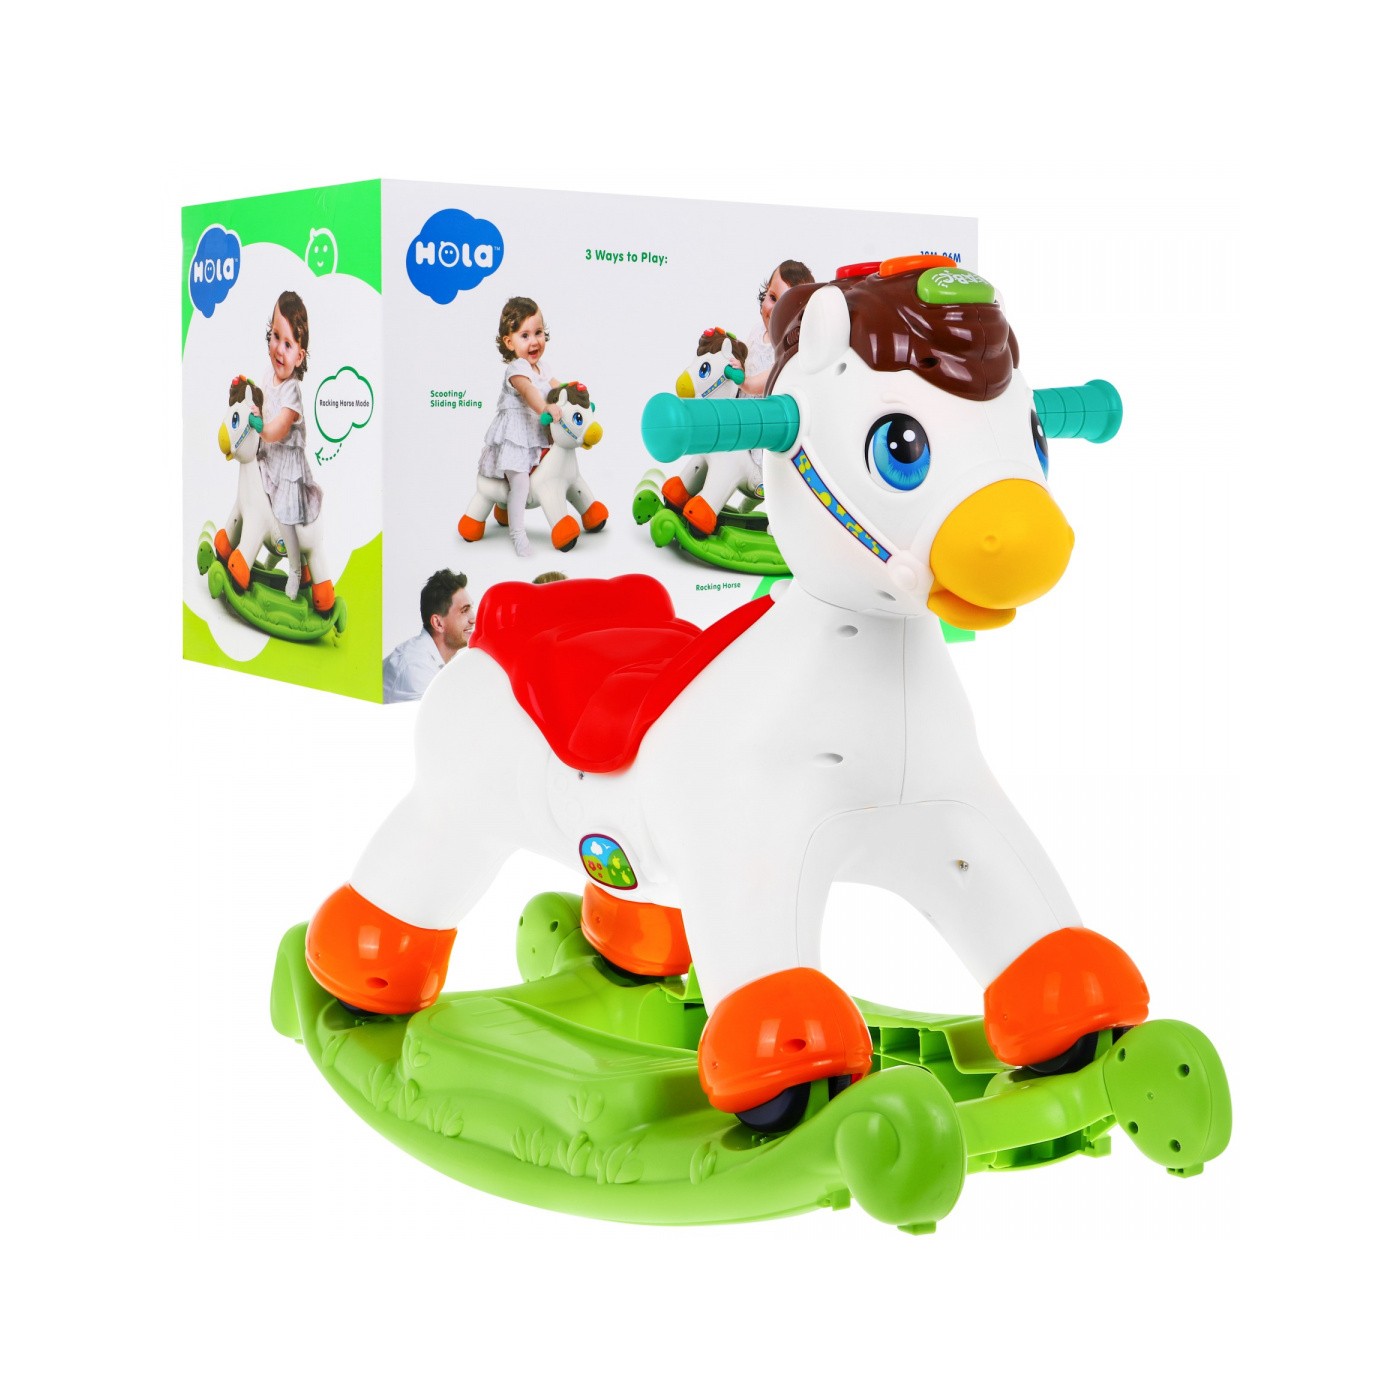 Rocking Horse-Ride on 2 in 1